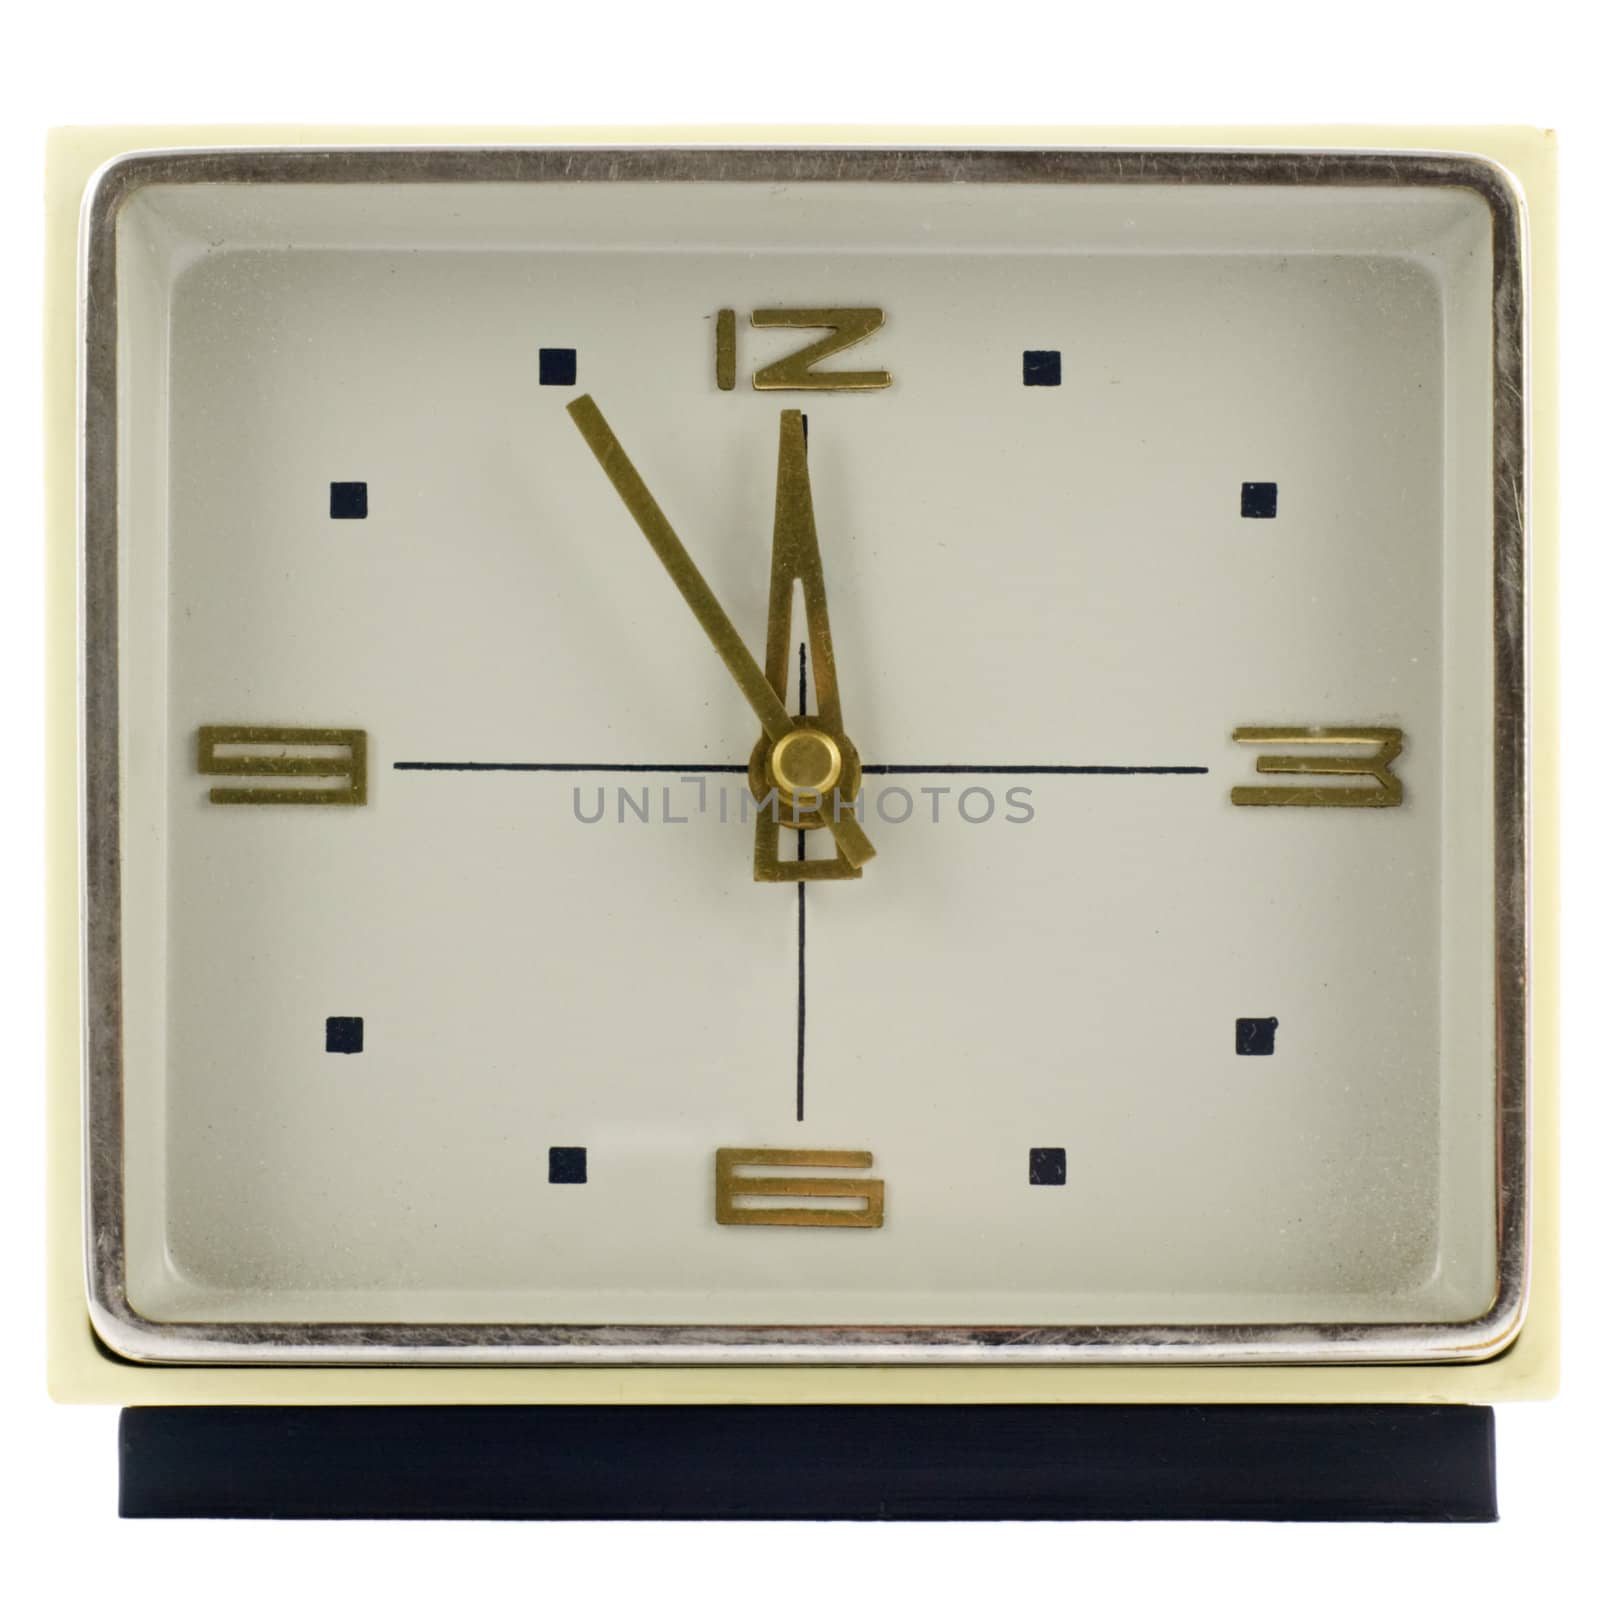 Vintage mechanical wind-up alarm clock over white isolated